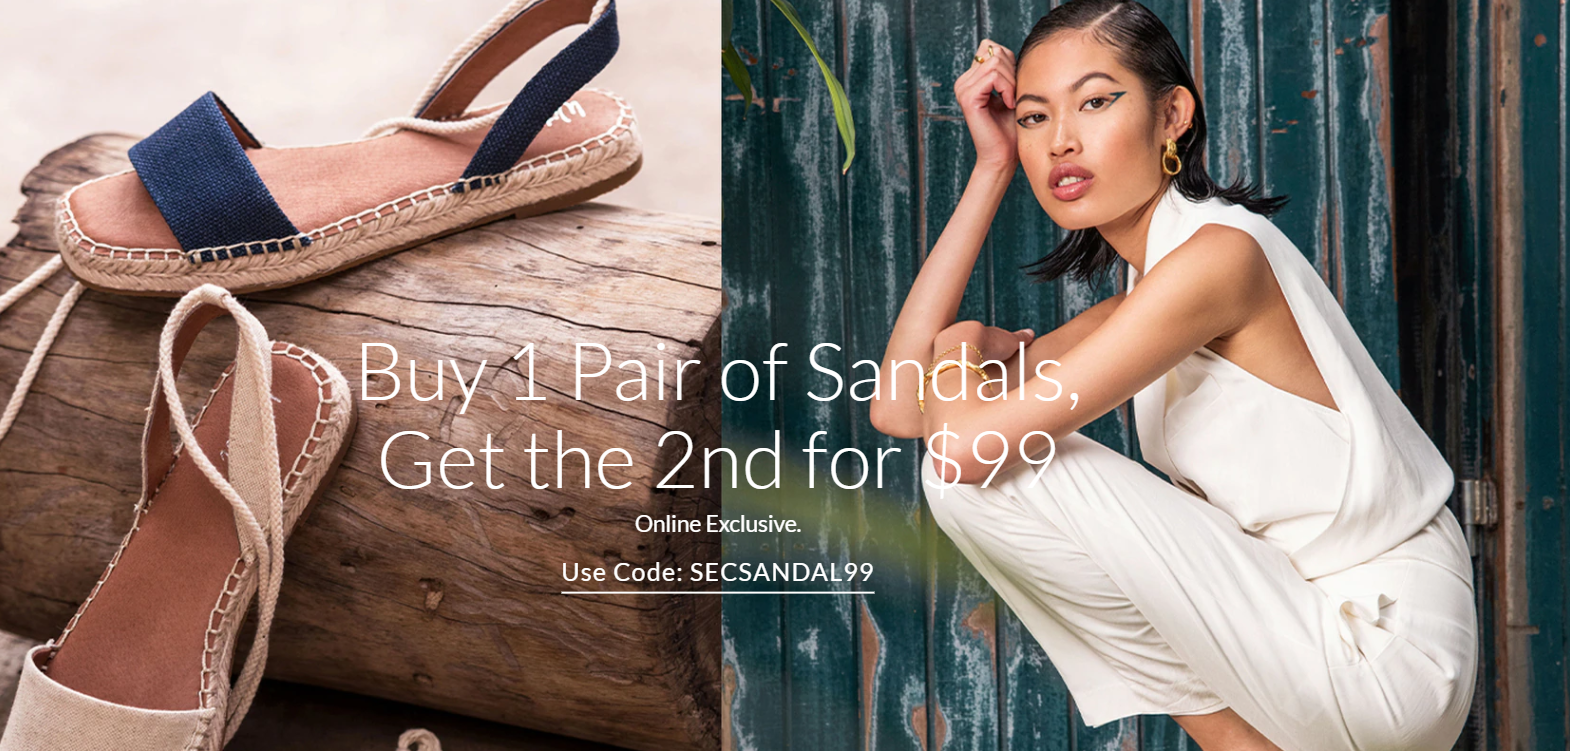 Get the 2nd pair for $99 when you buy a pair of sandals